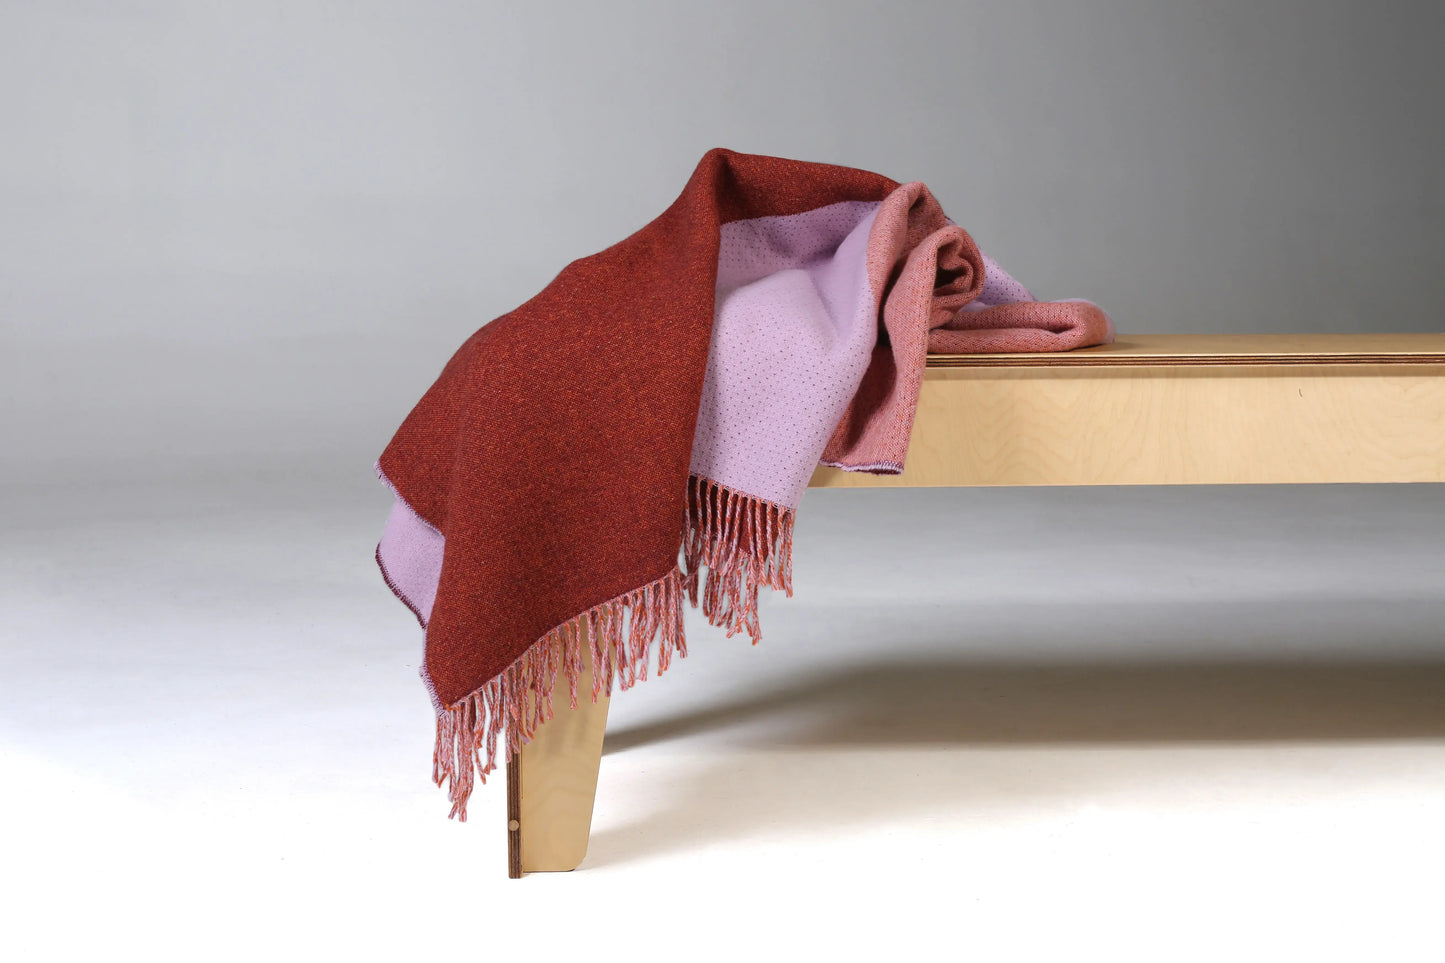 Red and pink wool blanket on edge of table.